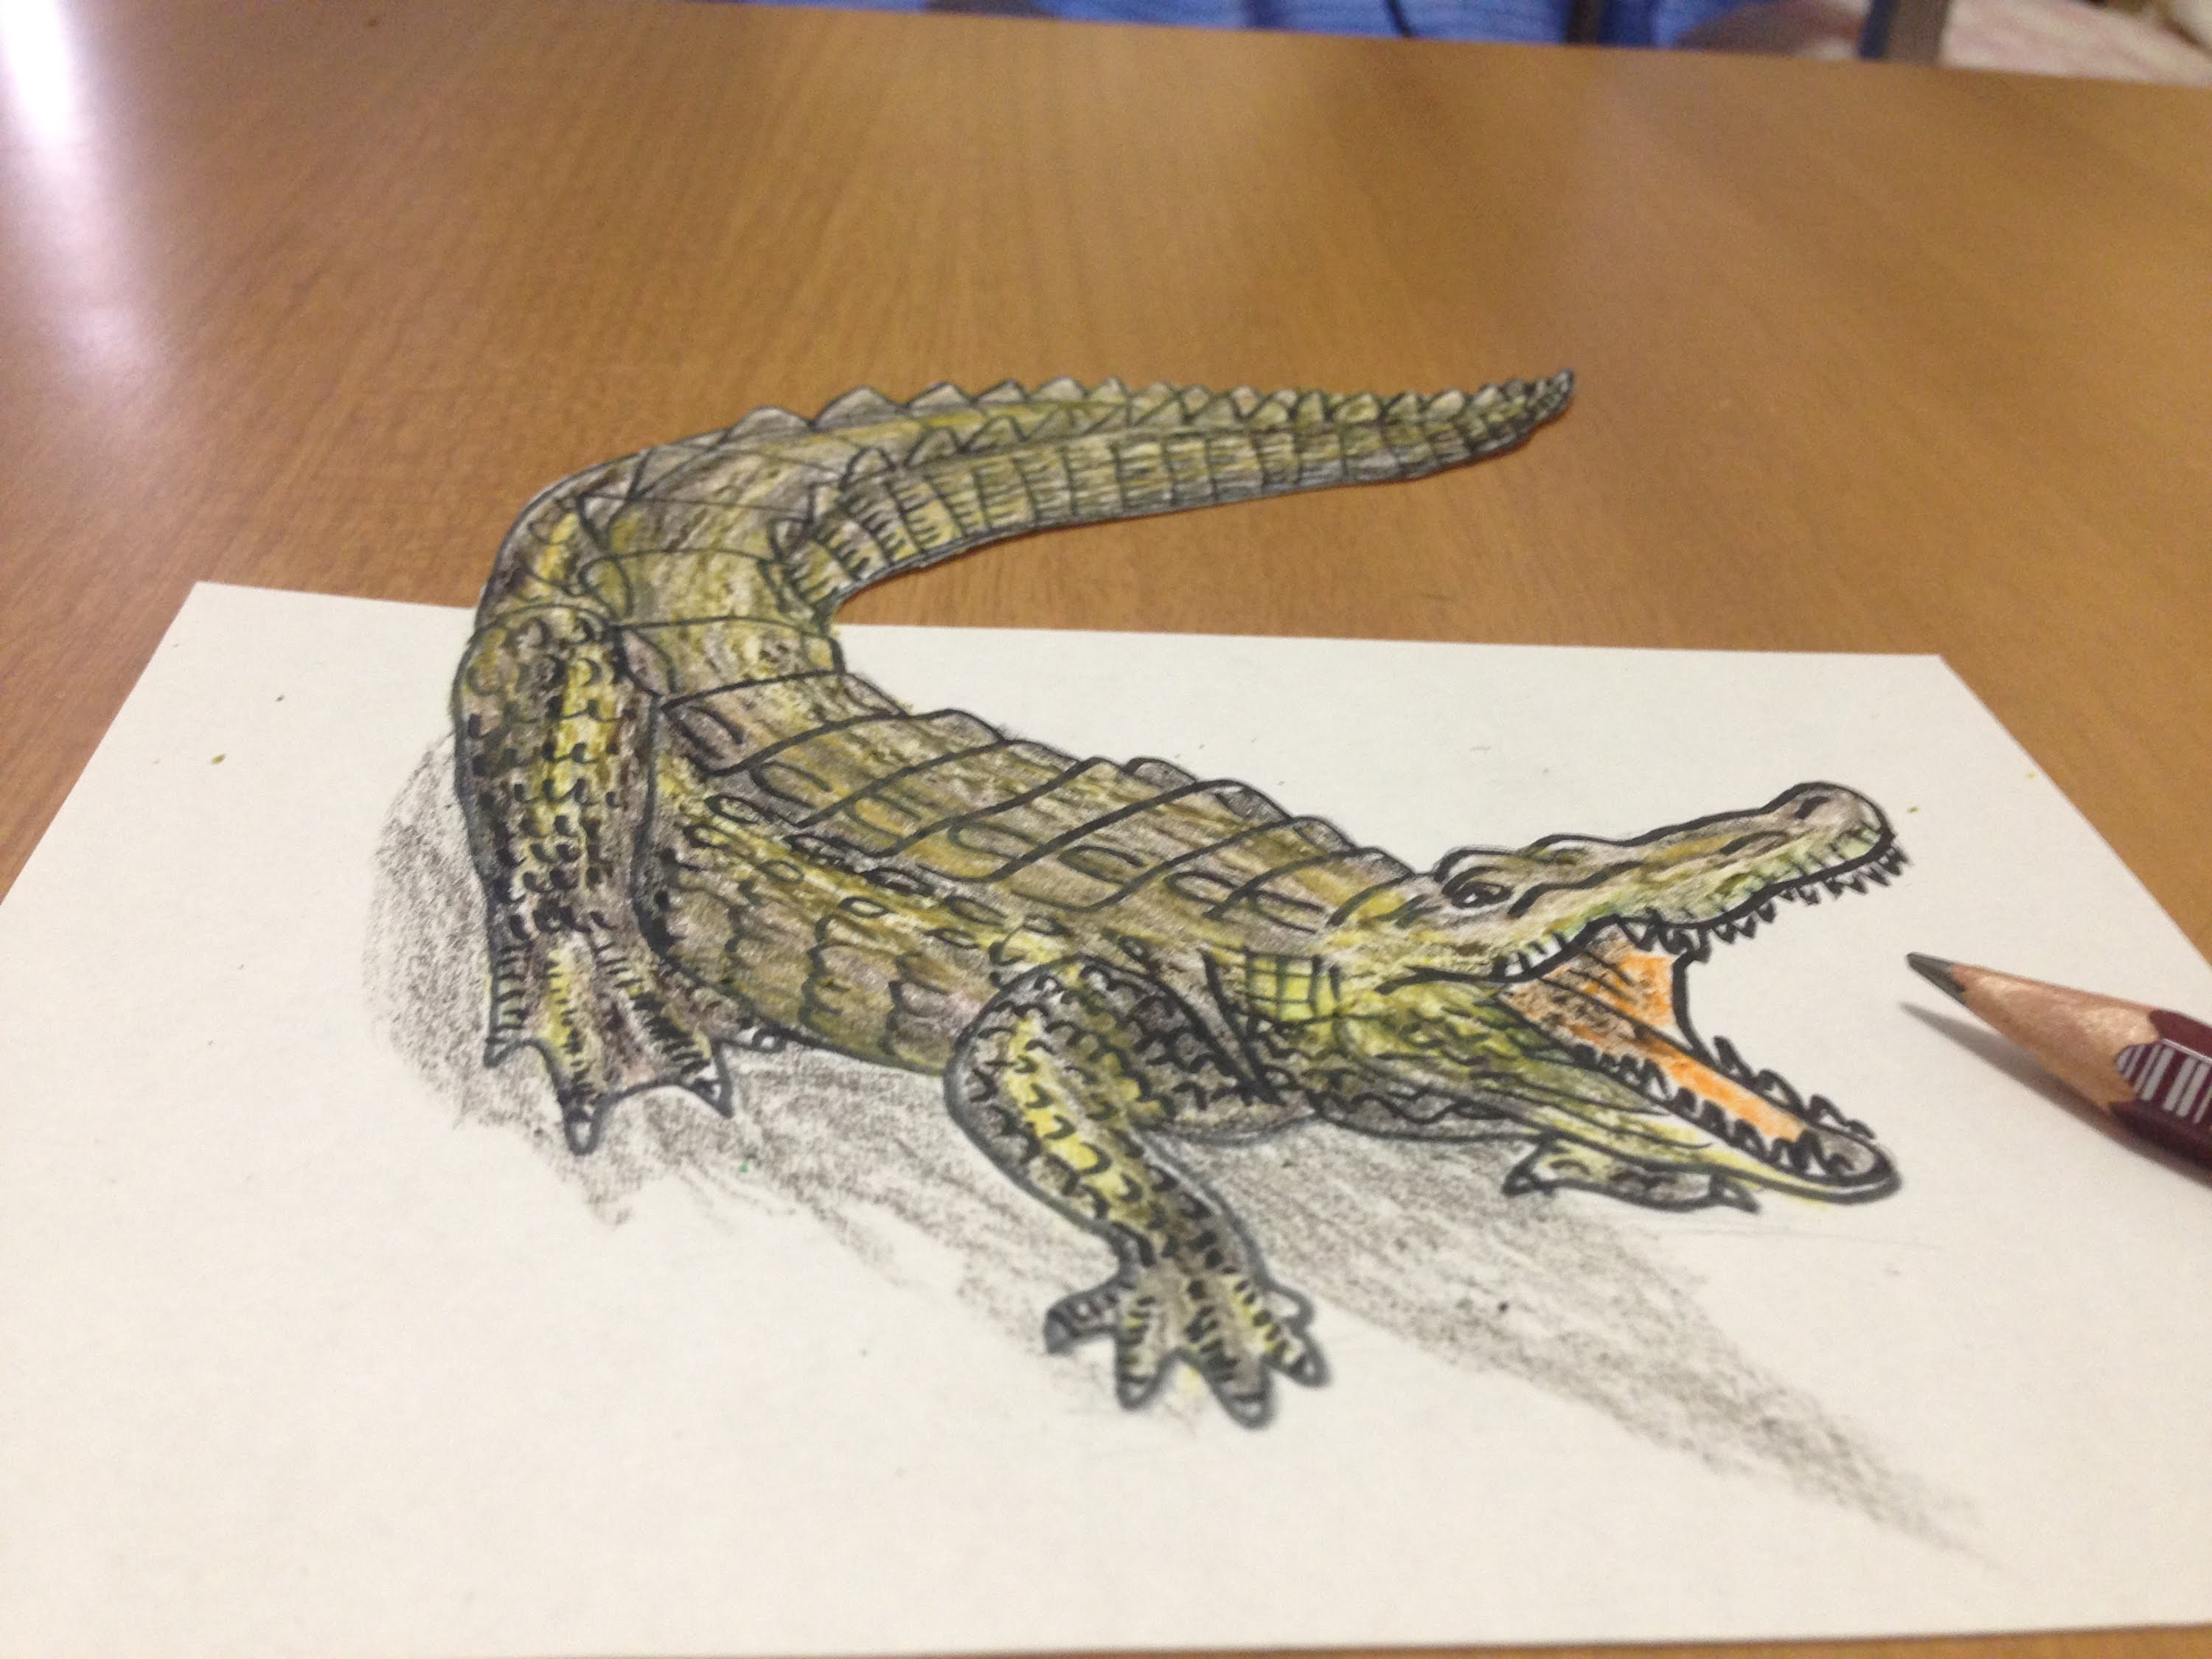 Creative Sketch Drawing Of Crocs with Pencil